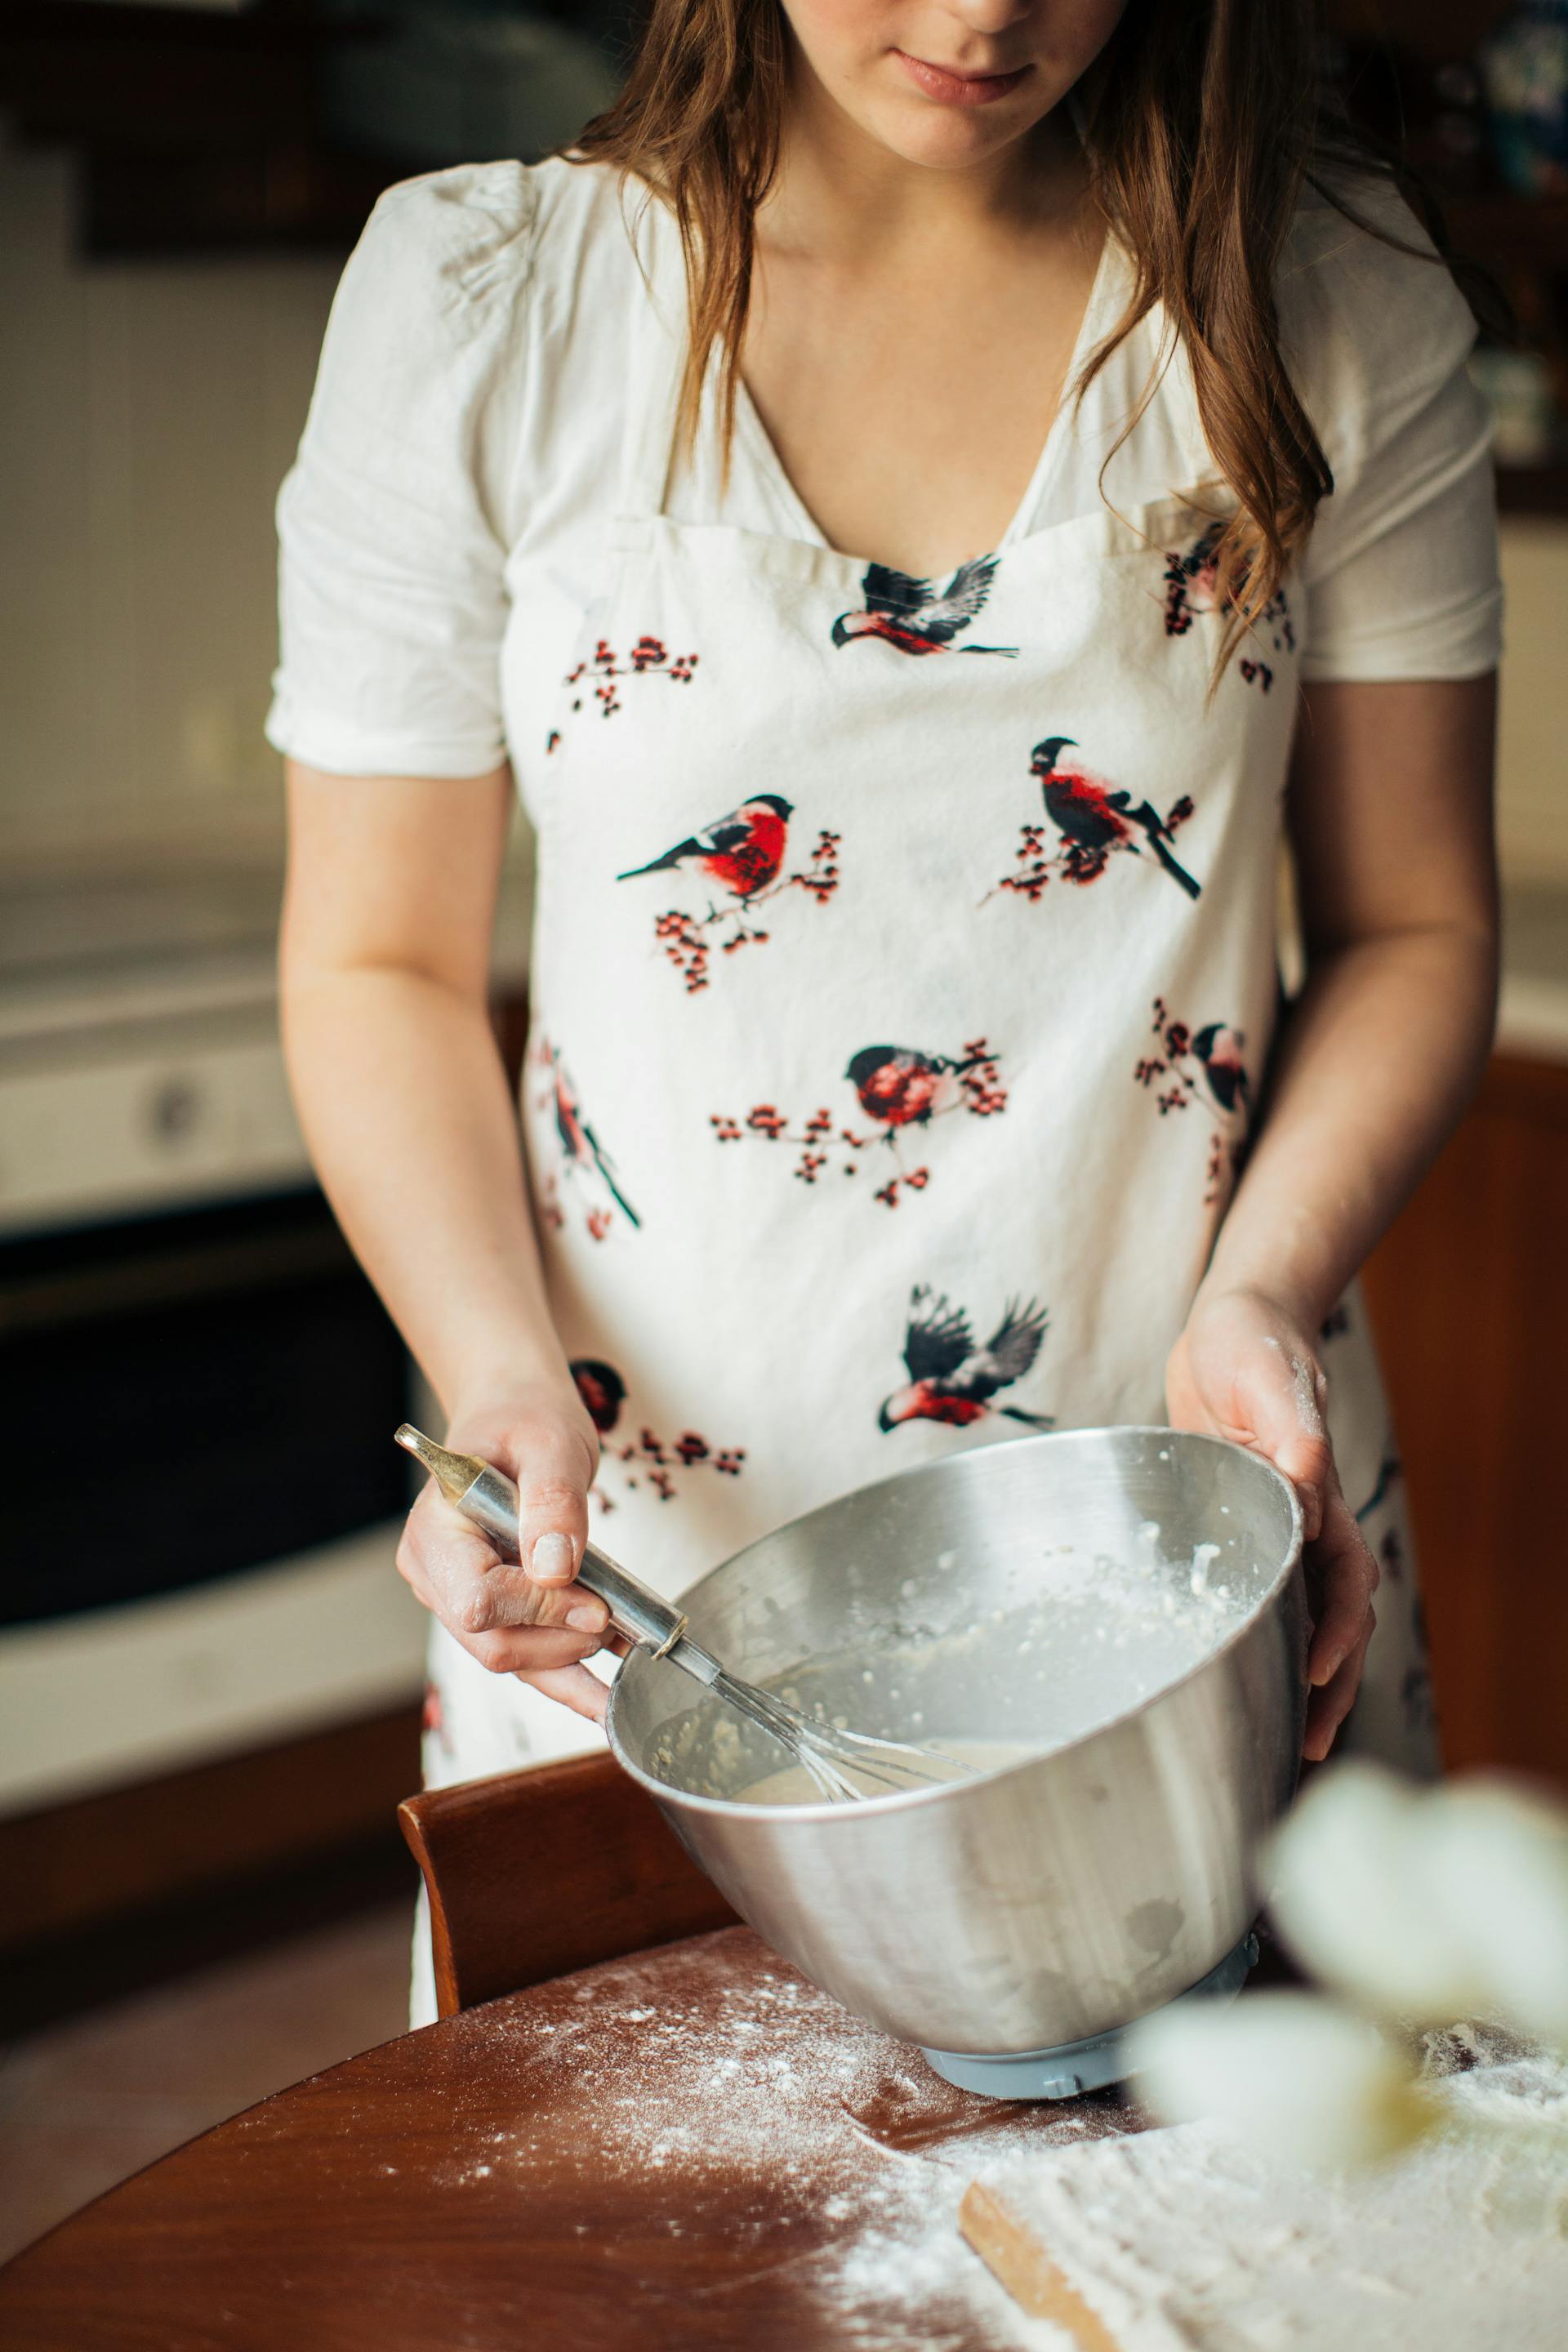 A close-up of a young woman mixing ingredients in a stainless steel bowl for baking | Source: Pexels